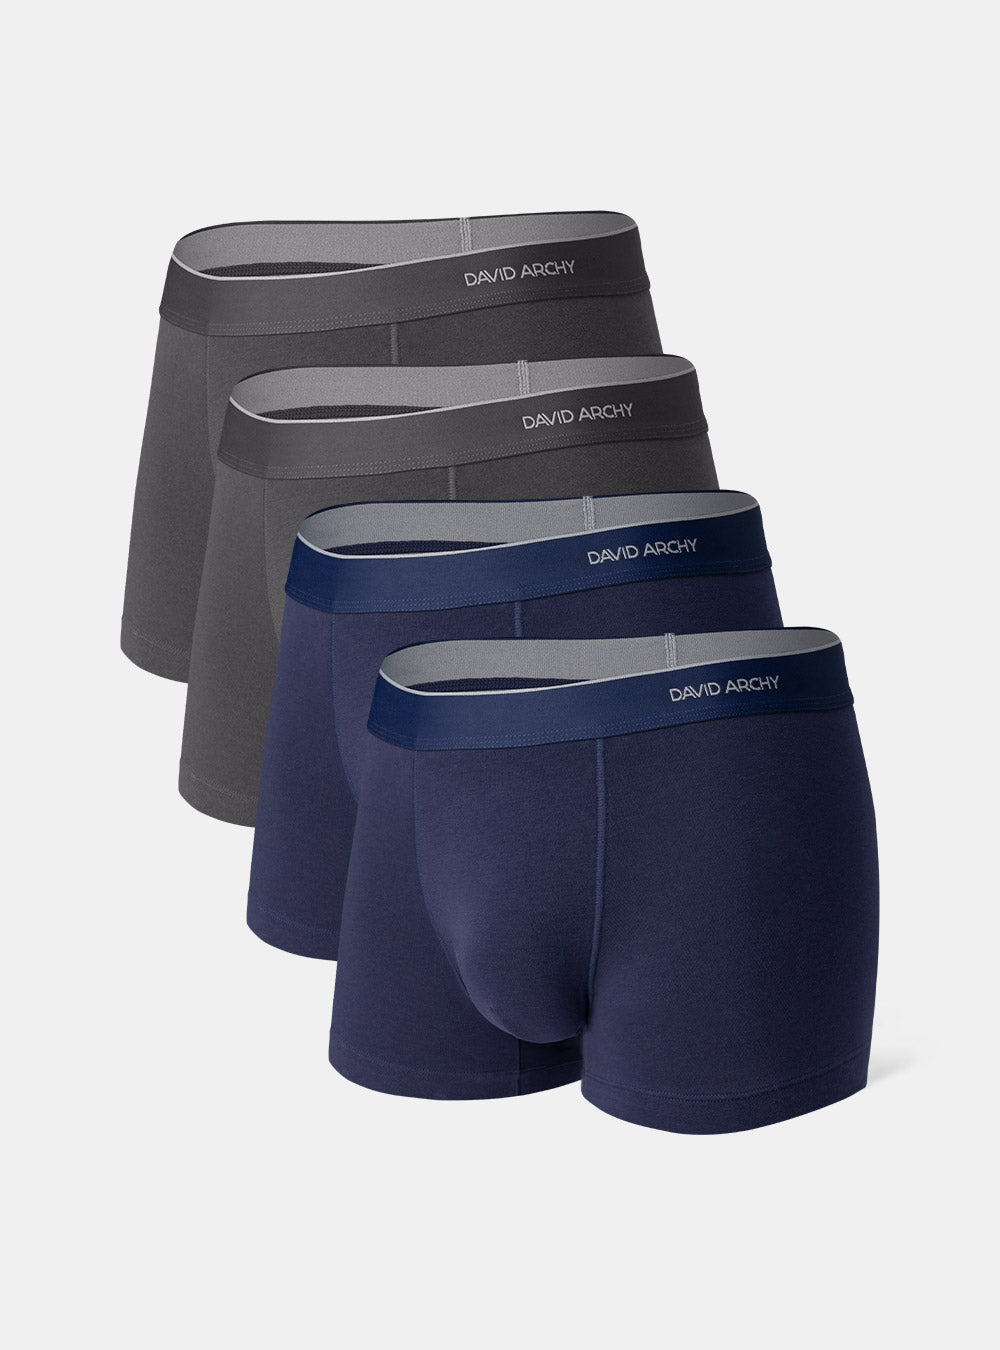 BAMBOO COOL Mens Underwear Trunks for Man Soft Waistband Open-fly  No-ride-up Trunk Boxers Excellent Support Briefs(4 pack) at  Men's  Clothing store